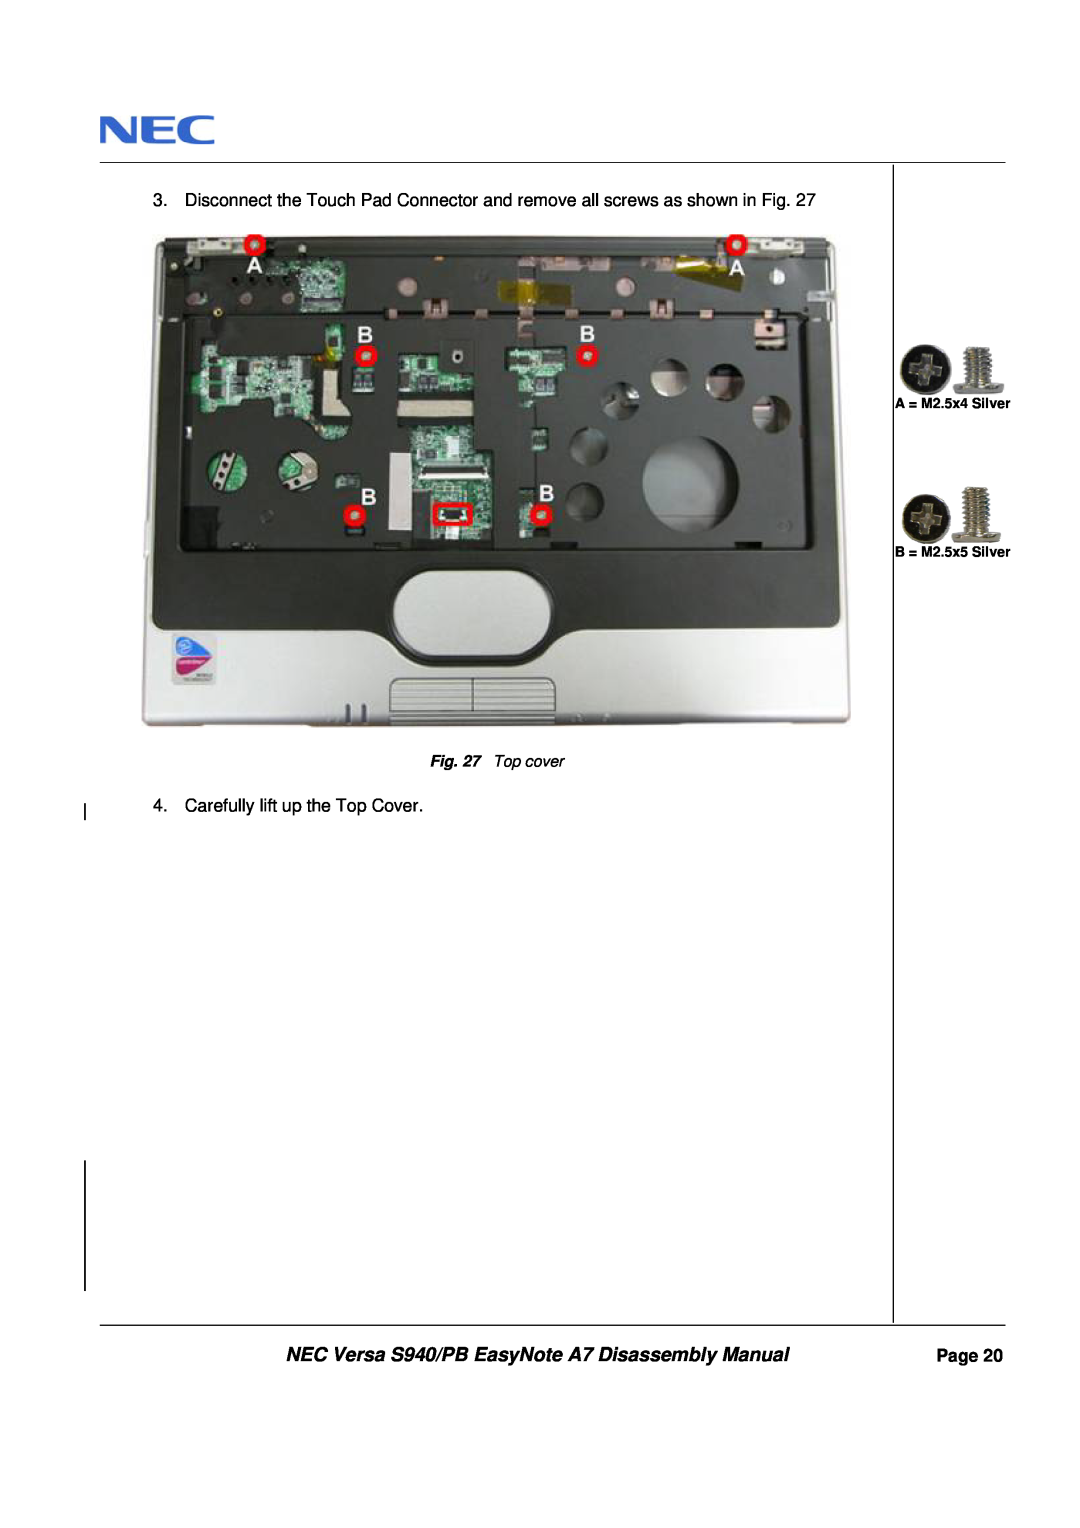 Packard Bell manual NEC Versa S940/PB EasyNote A7 Disassembly Manual, Carefully lift up the Top Cover, Top cover, Page 